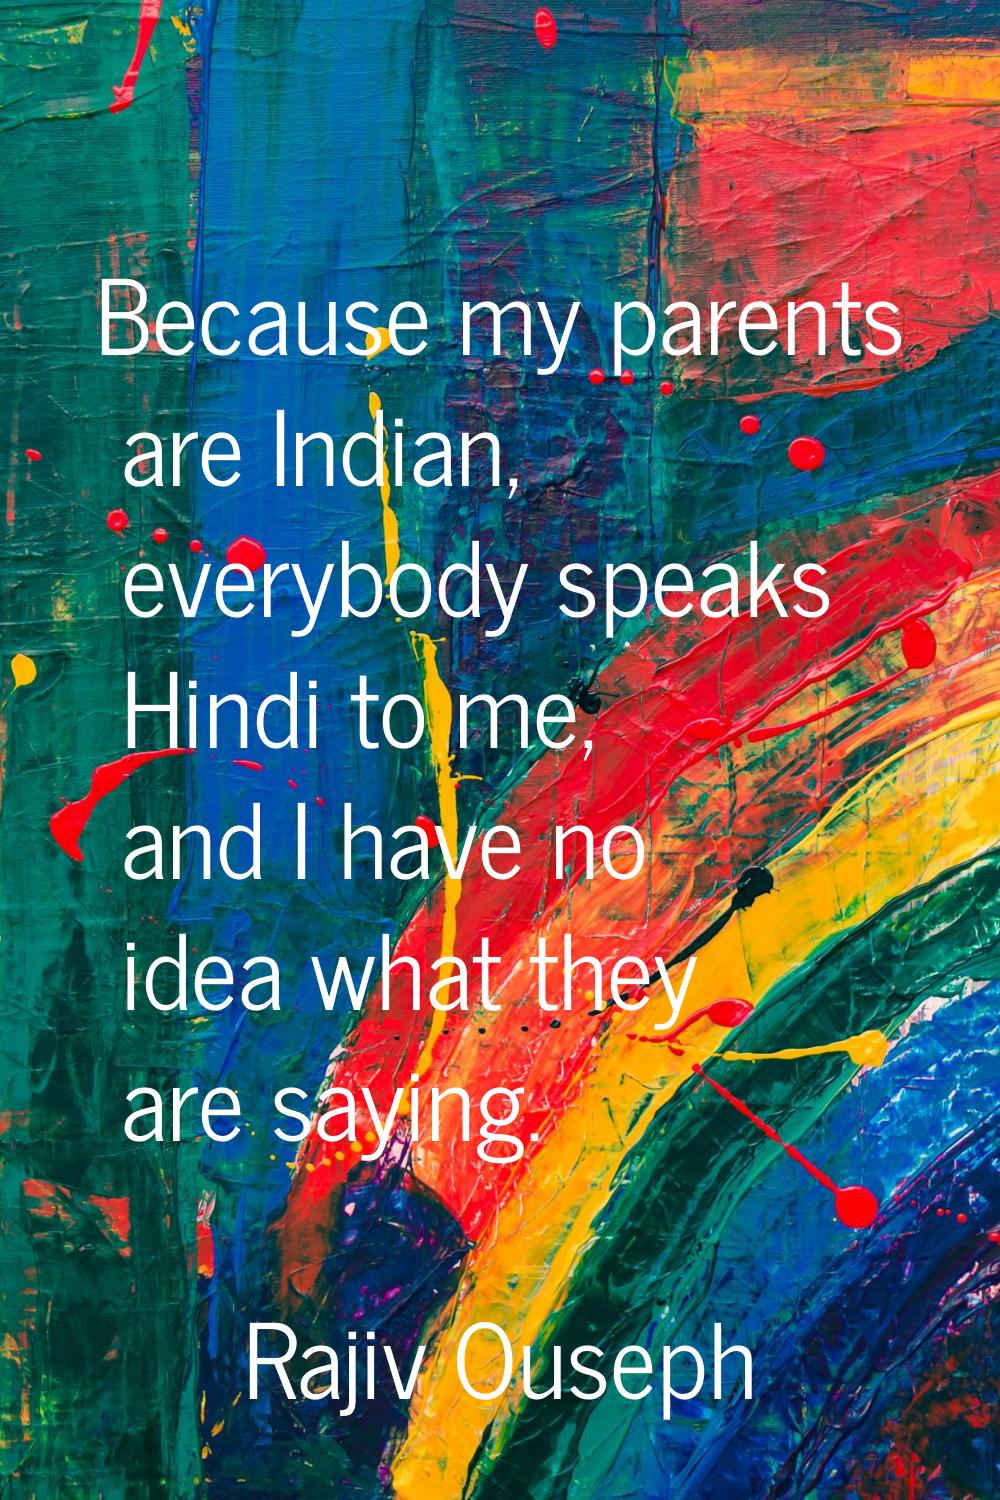 Because my parents are Indian, everybody speaks Hindi to me, and I have no idea what they are sayin